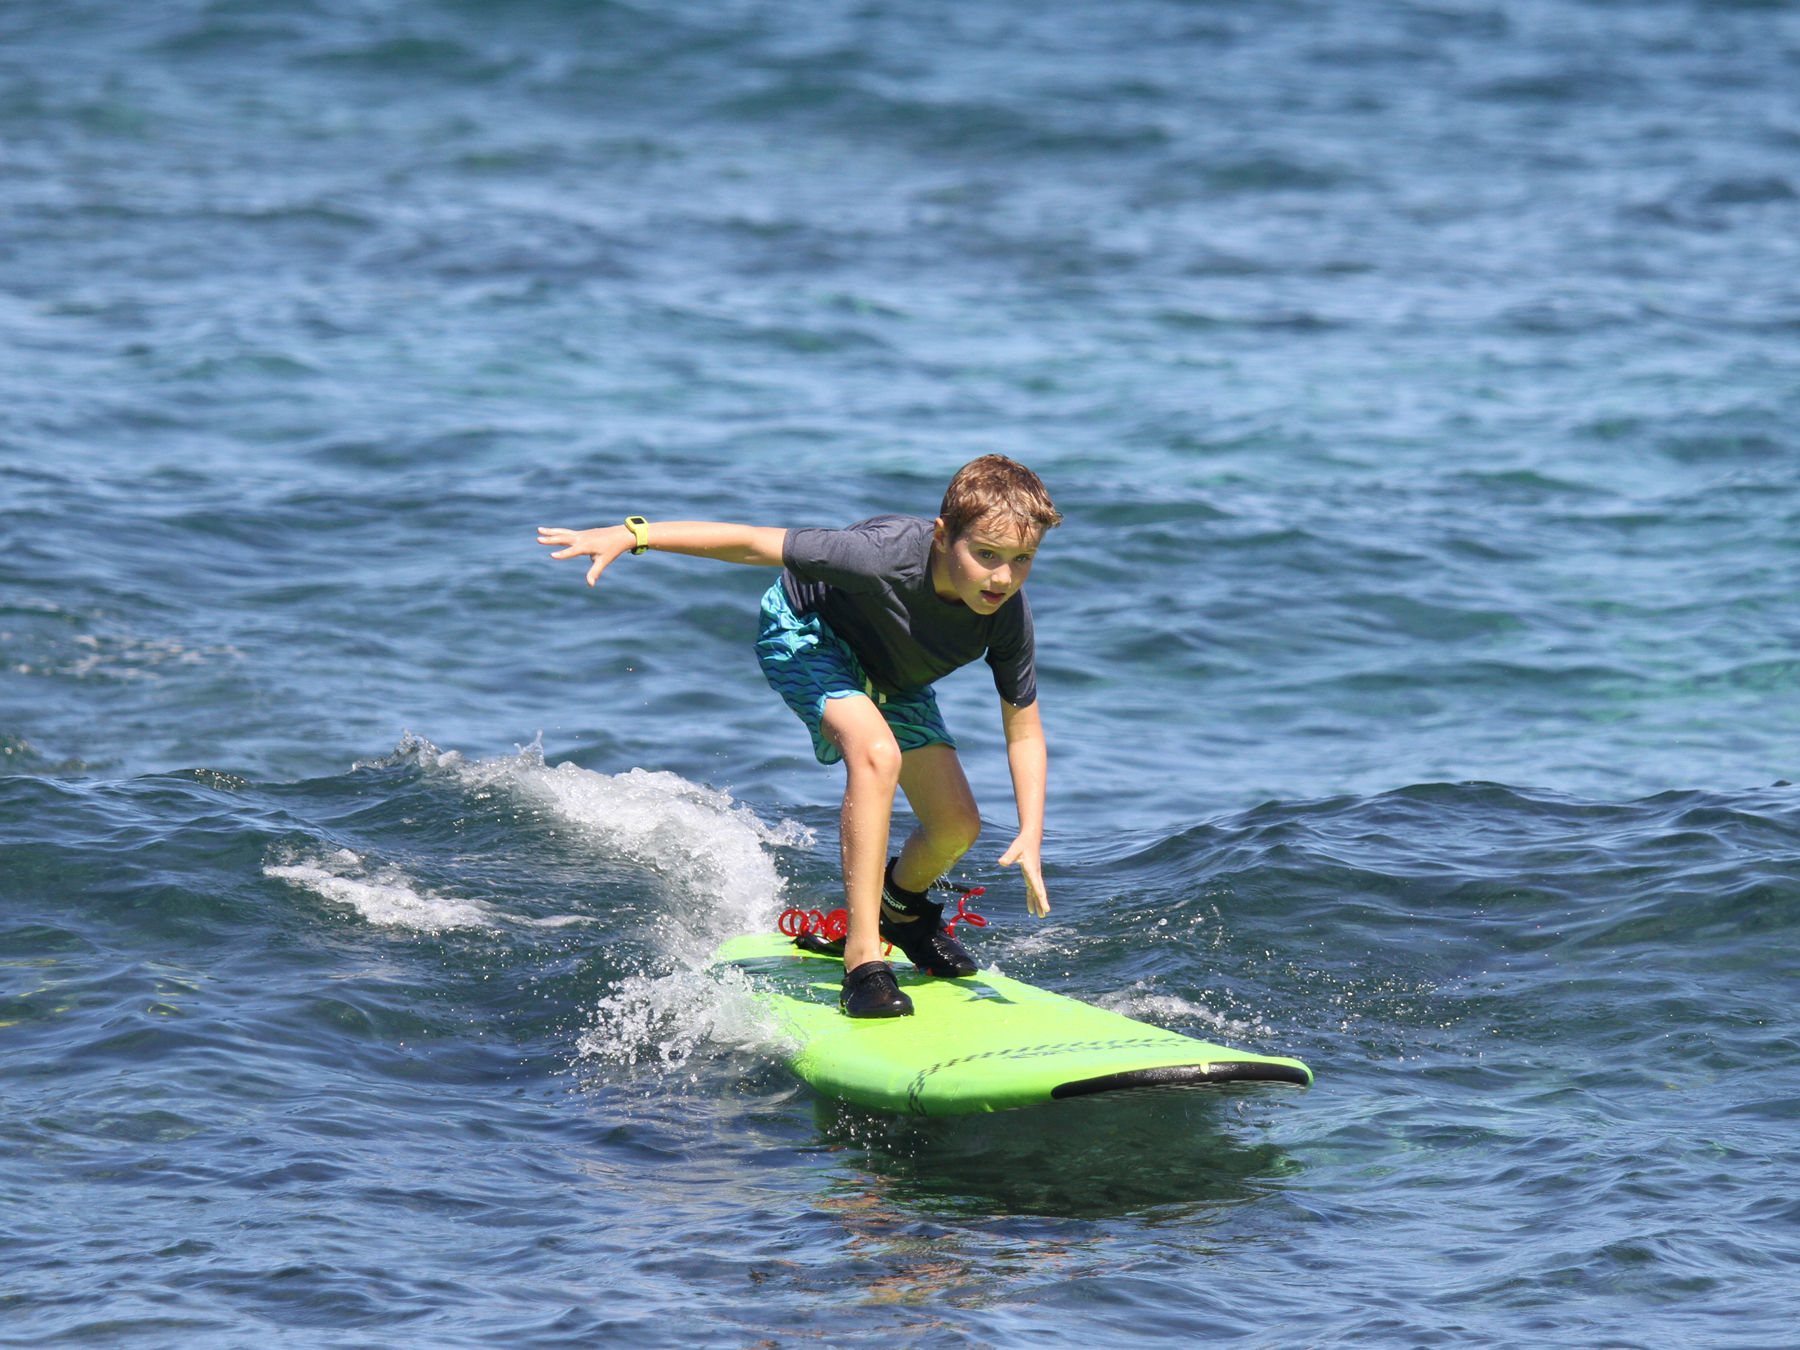 Young surfer student riding a wave